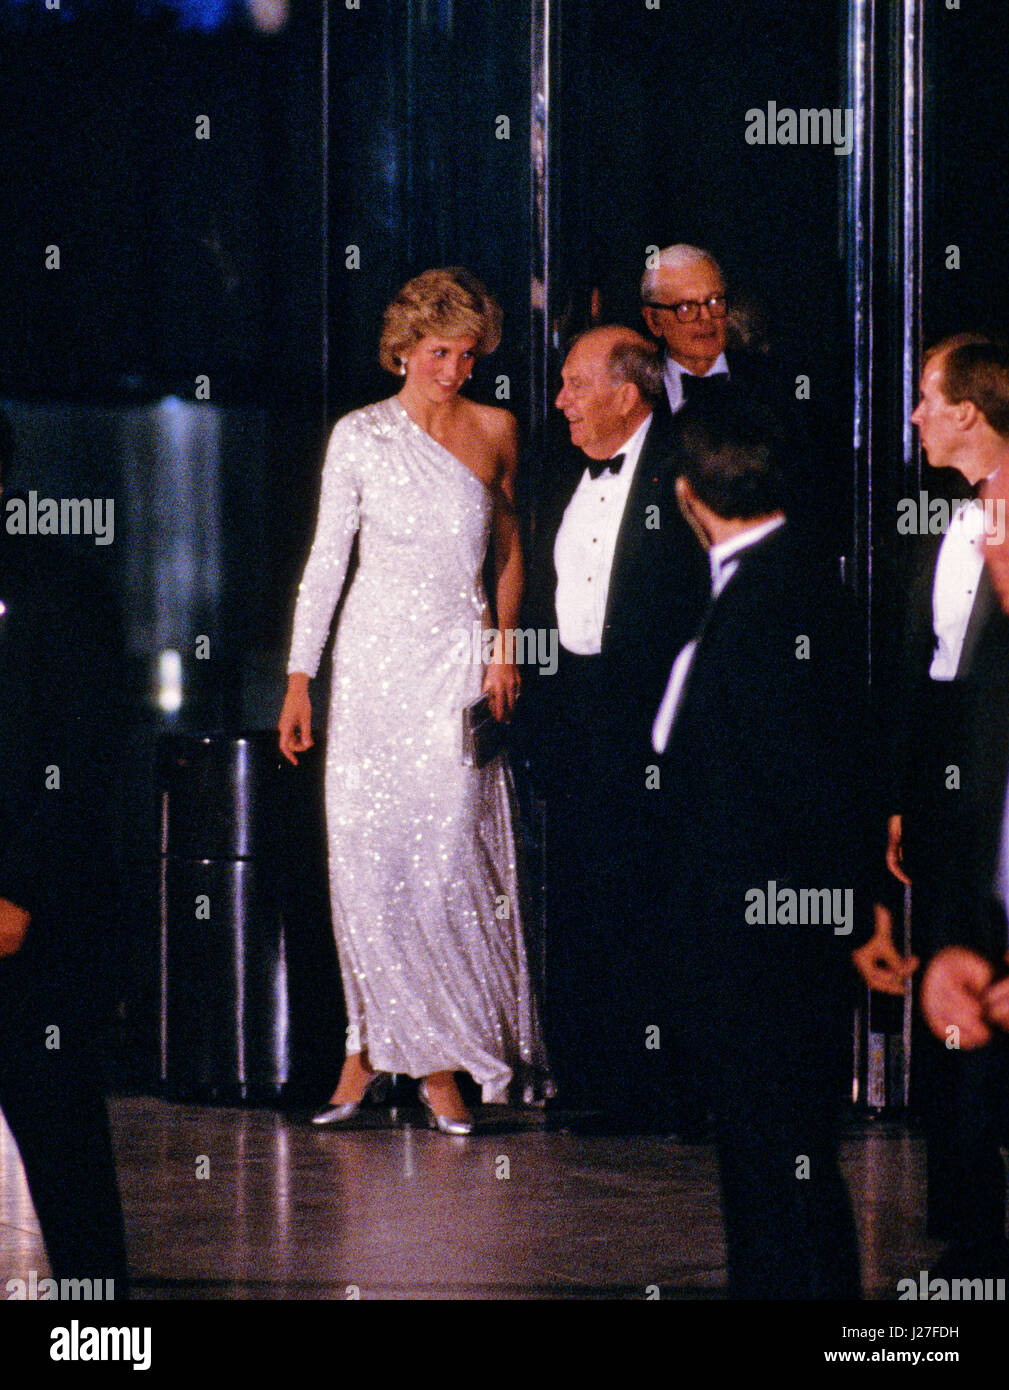 Princess Diana departs the National Gallery of Art in Washington, DC following an evening dinner and reception accompanied by Dr. Franklin Murphy, Board Chairman of the National Gallery of Art, and John Stevenson, President of the National Gallery of Art, in Washington, DC on November 11, 1985. Credit: Howard L. Sachs/CNP - NO WIRE SERVICE- Photo: Howard L. Sachs/Consolidated News Photos/Howard L. Sachs - CNP Stock Photo